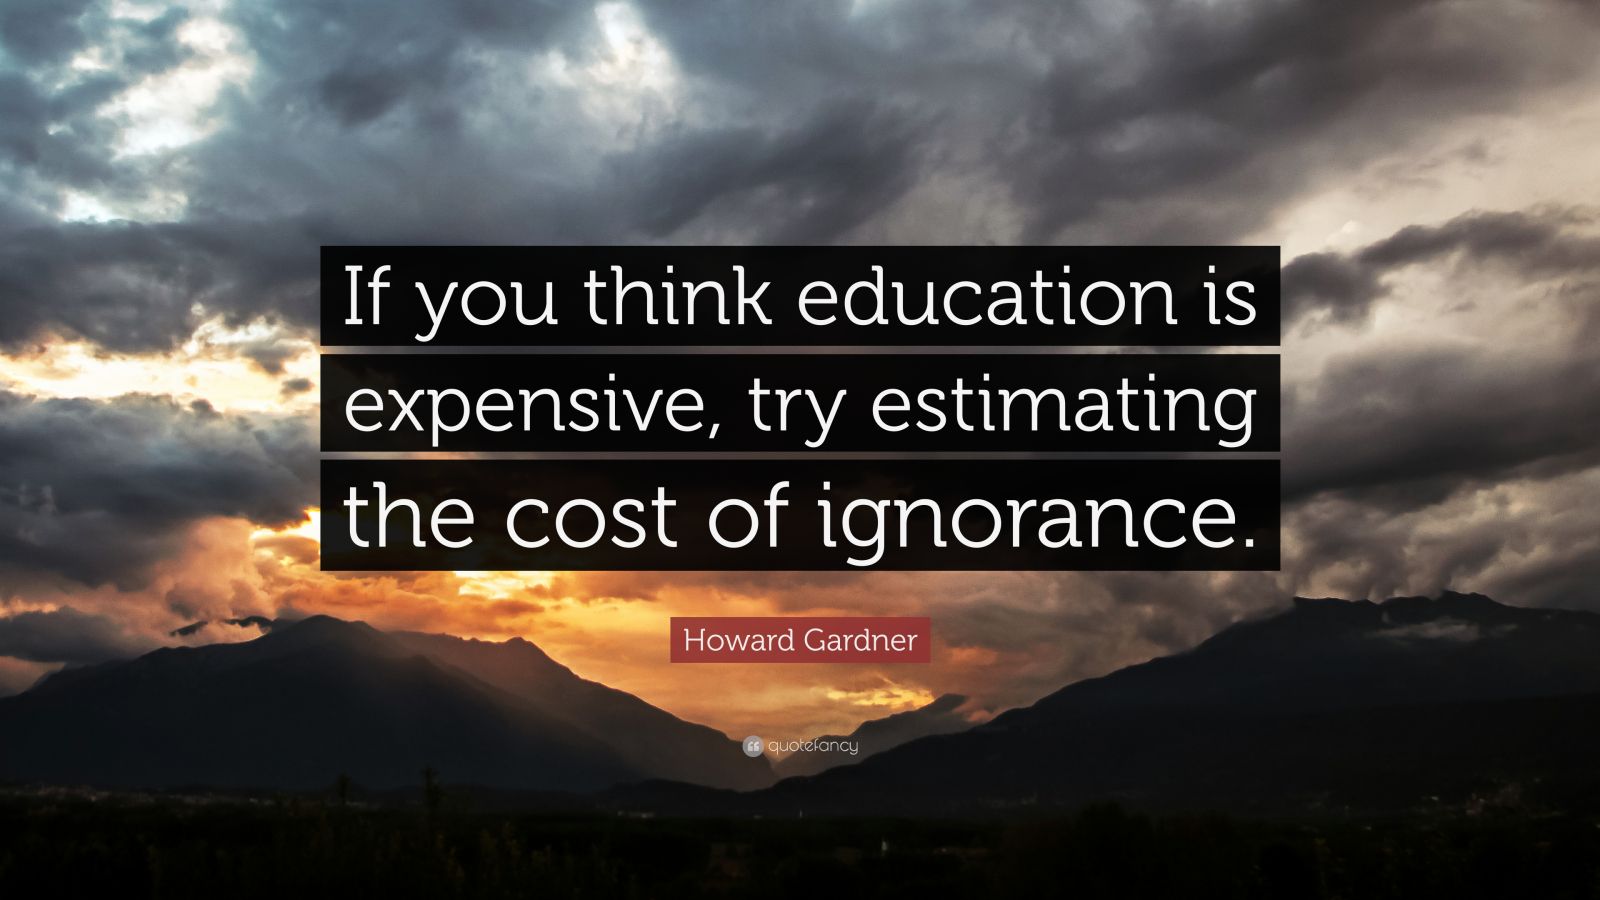 meaning of if you think education is expensive